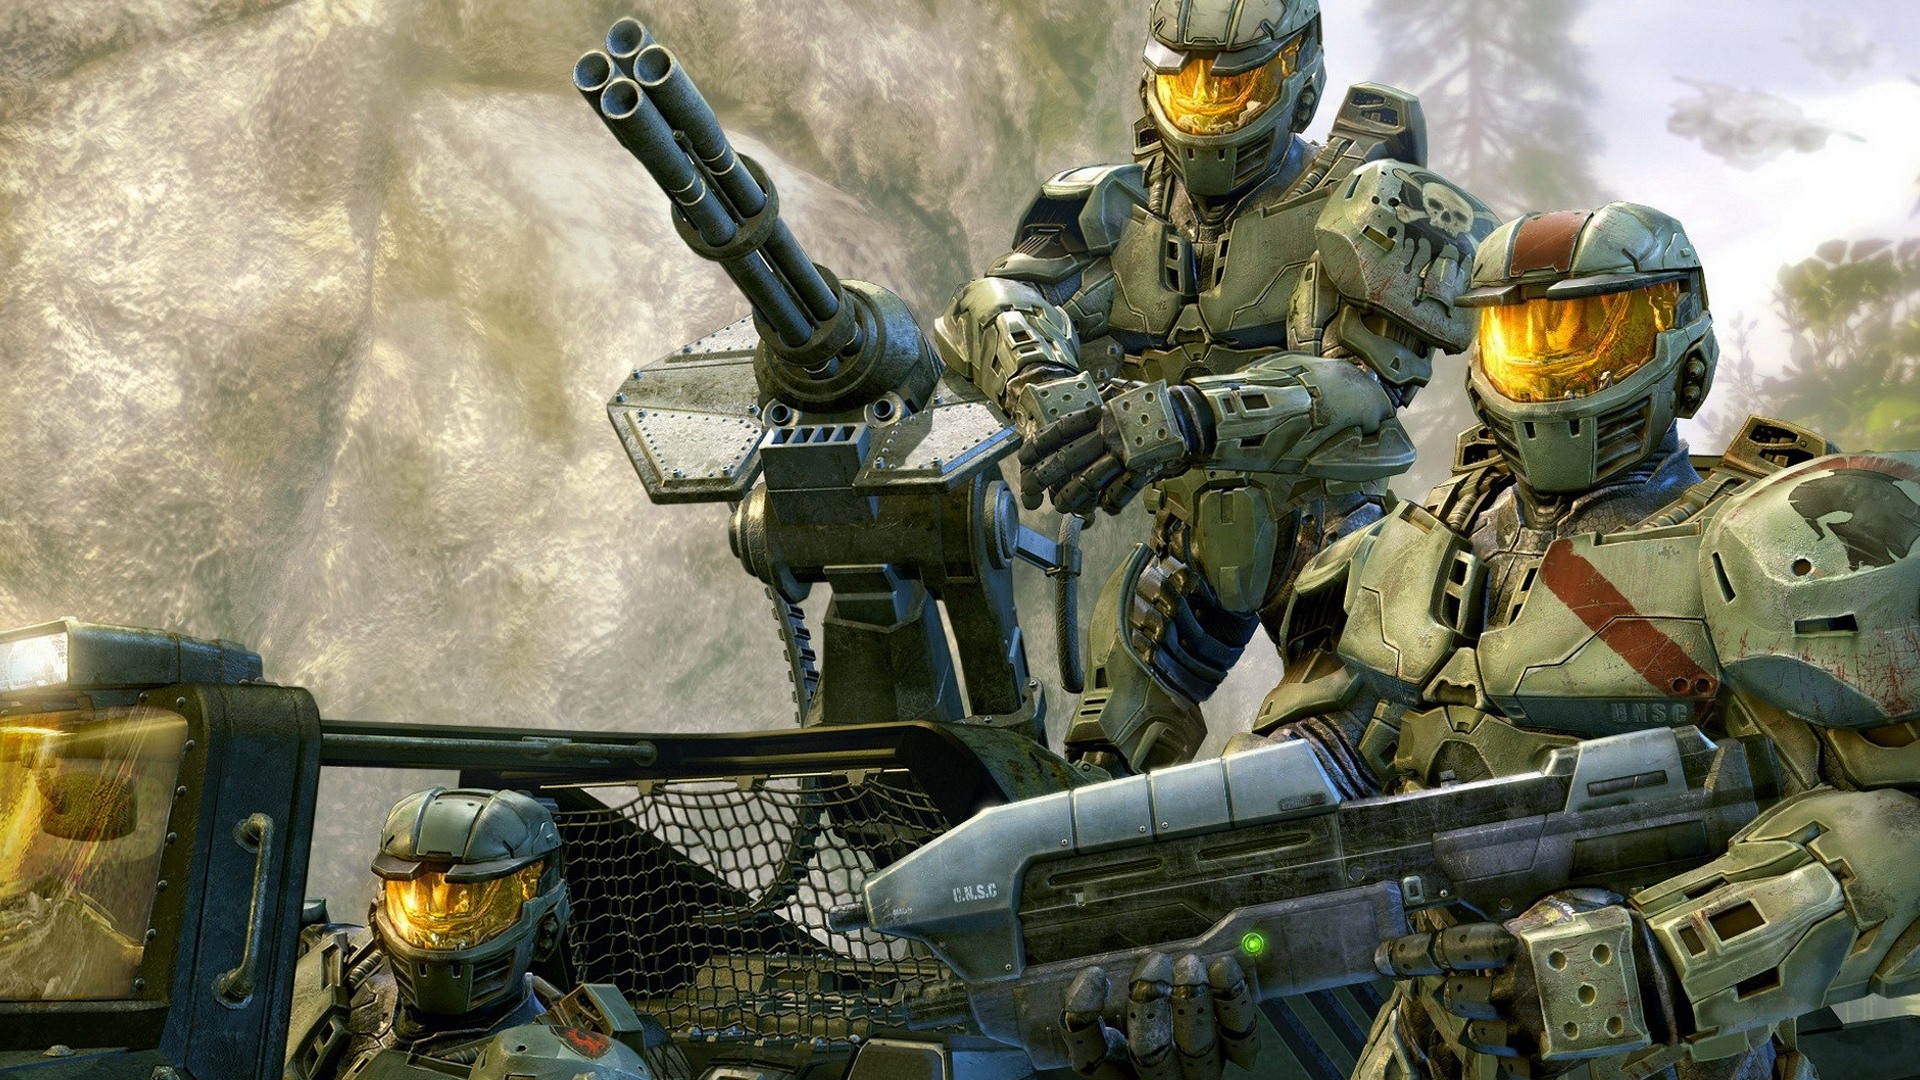 Halo Game HD Wallpapers #7 - 1920x1080